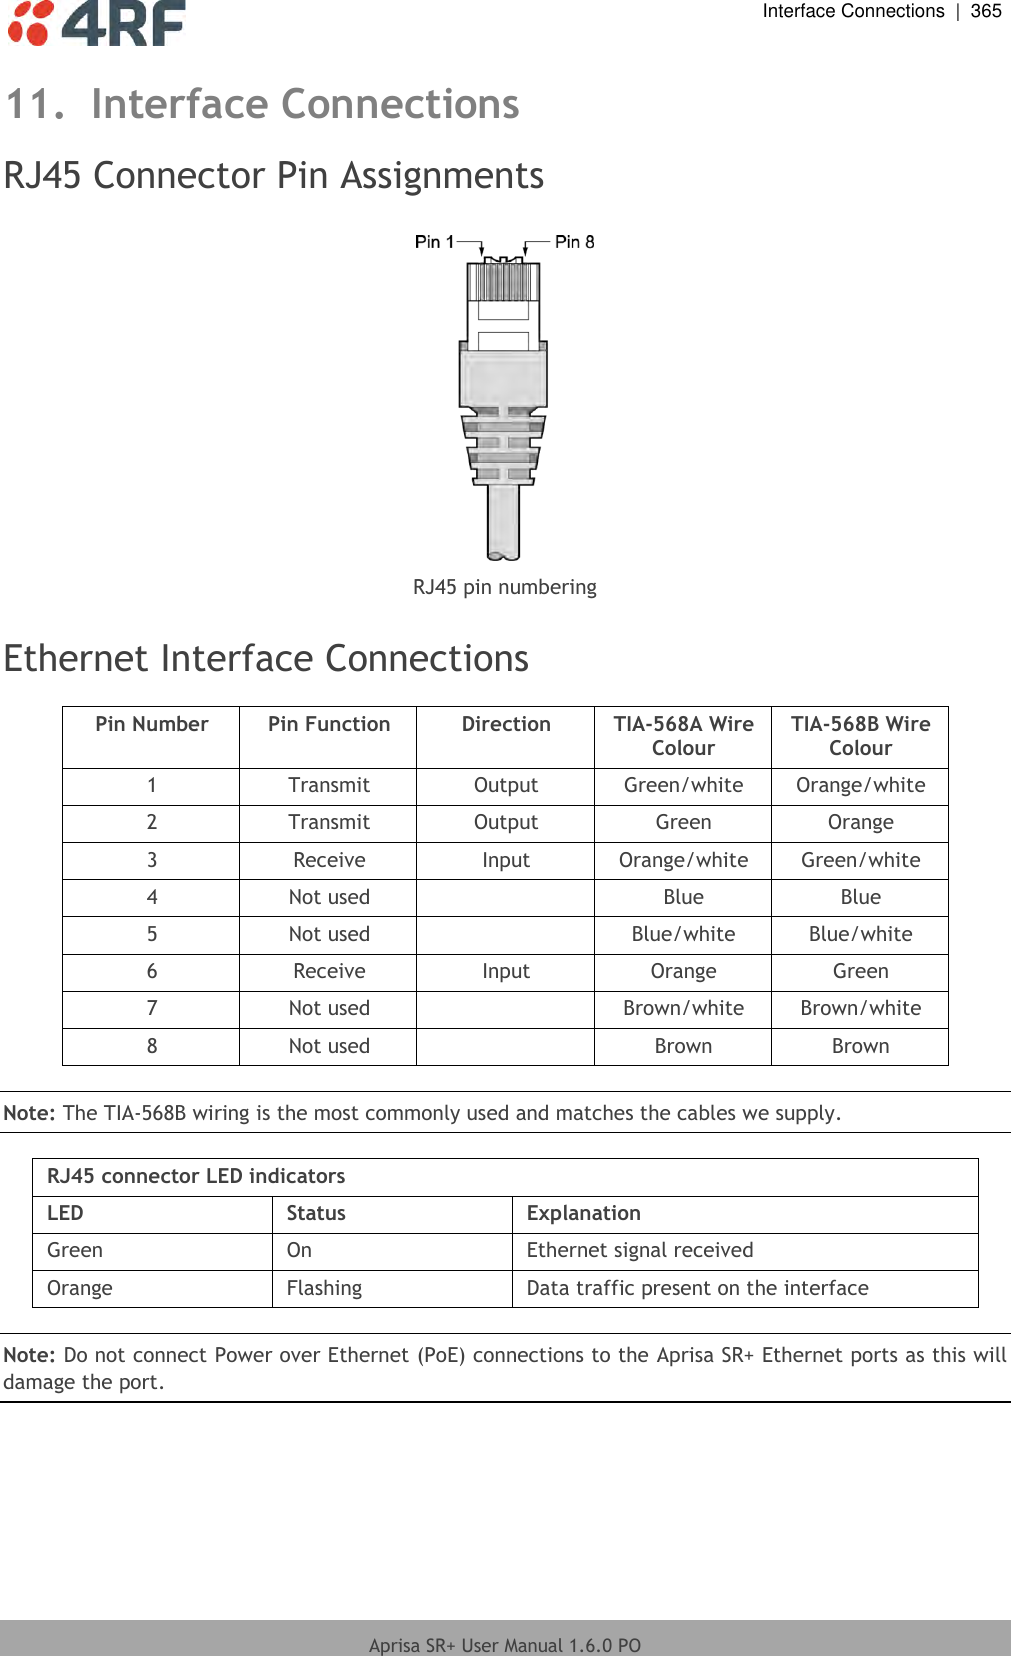  Interface Connections  |  365  Aprisa SR+ User Manual 1.6.0 PO  11. Interface Connections RJ45 Connector Pin Assignments   RJ45 pin numbering  Ethernet Interface Connections  Pin Number Pin Function Direction TIA-568A Wire Colour TIA-568B Wire Colour 1 Transmit Output Green/white Orange/white 2 Transmit Output Green Orange 3 Receive Input Orange/white Green/white 4 Not used  Blue Blue 5 Not used  Blue/white Blue/white 6 Receive Input Orange Green 7 Not used  Brown/white Brown/white 8 Not used  Brown Brown  Note: The TIA-568B wiring is the most commonly used and matches the cables we supply.  RJ45 connector LED indicators LED Status Explanation Green On Ethernet signal received Orange Flashing Data traffic present on the interface  Note: Do not connect Power over Ethernet (PoE) connections to the Aprisa SR+ Ethernet ports as this will damage the port. 